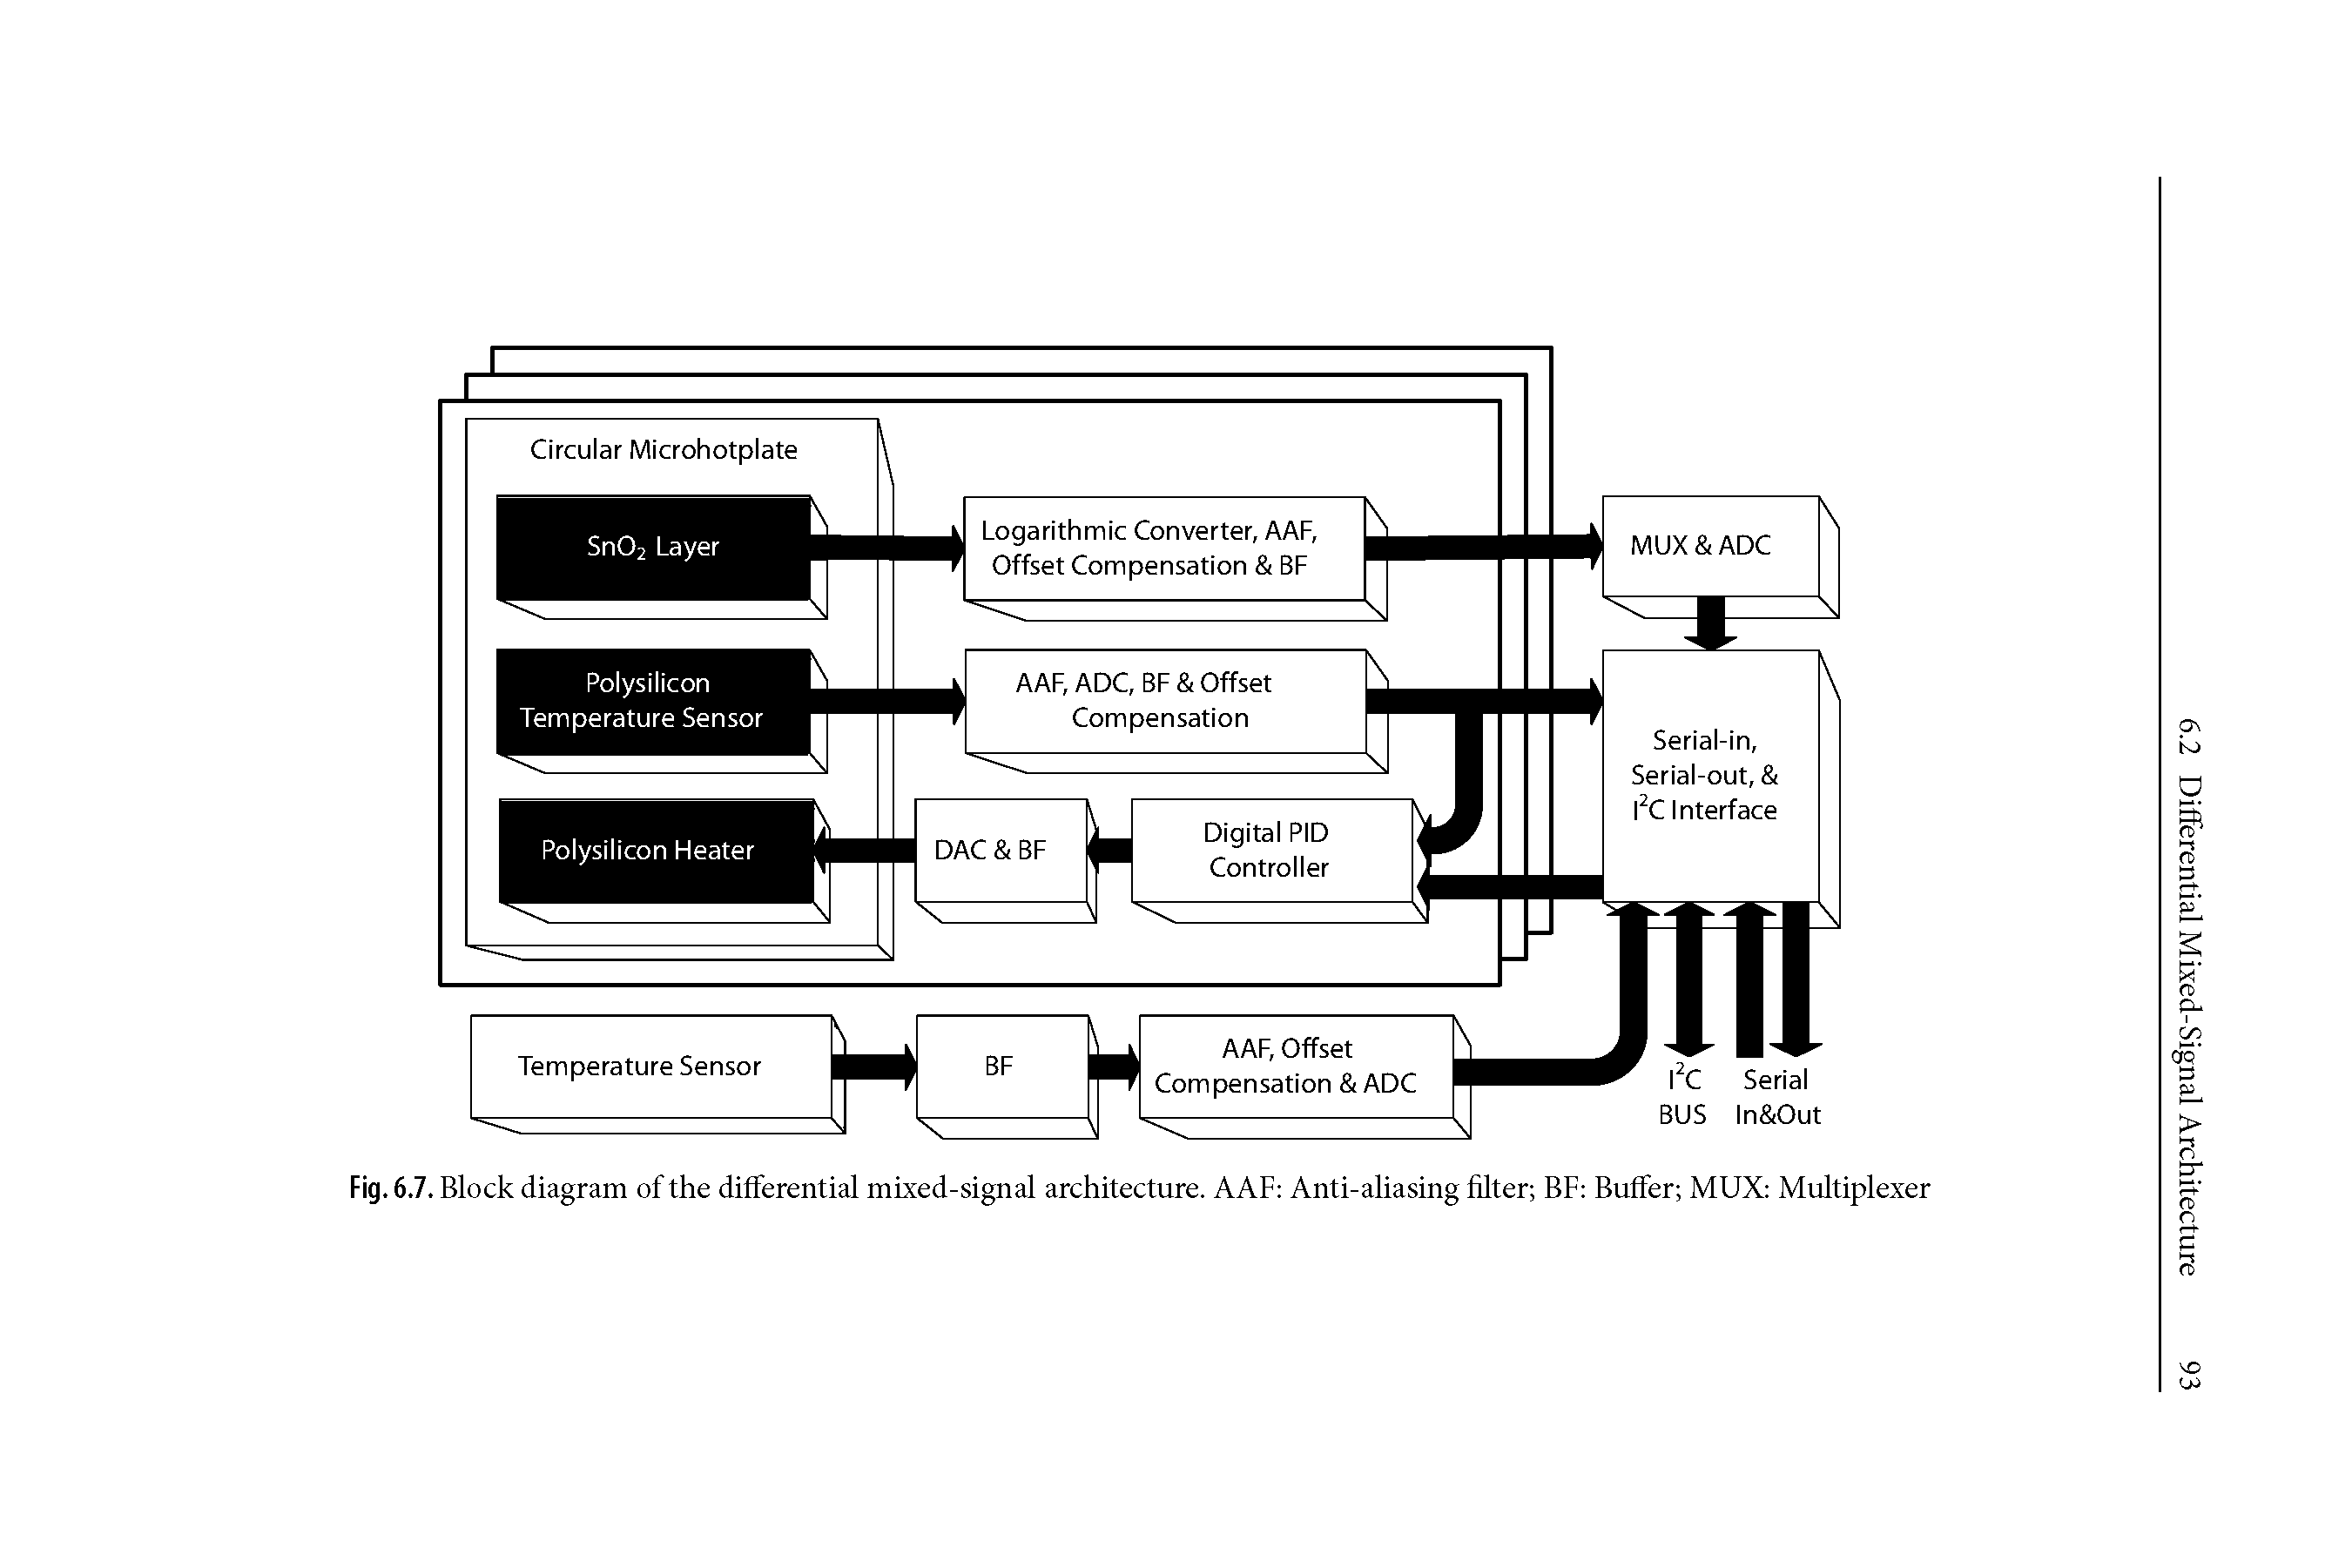 Fig. 6.7. Block diagram of the differential mixed-signal architecture. AAF Anti-aliasing filter BF Buffer MUX Multiplexer...